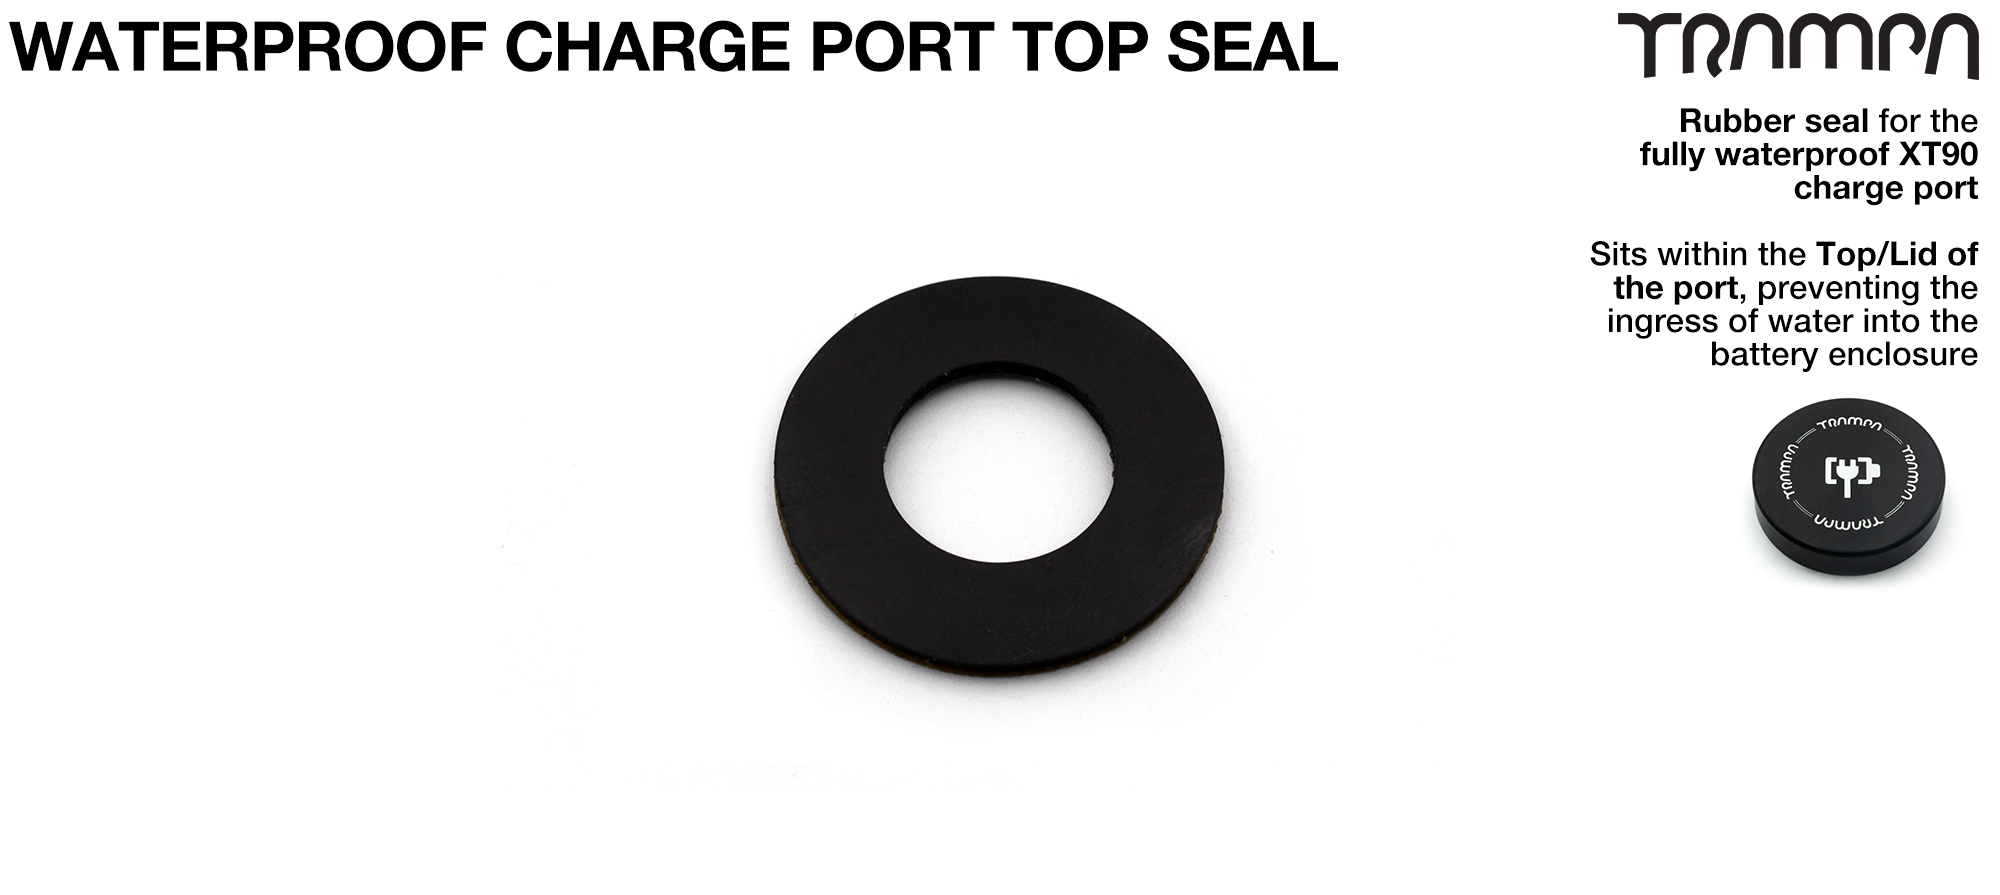 ORRSOM GT STICKY Backed Charge Port Rubber FLAT Ring CAP SEAL made from NBR Rubber 12x23.3x 1mm Used for Waterproofing the Charge port